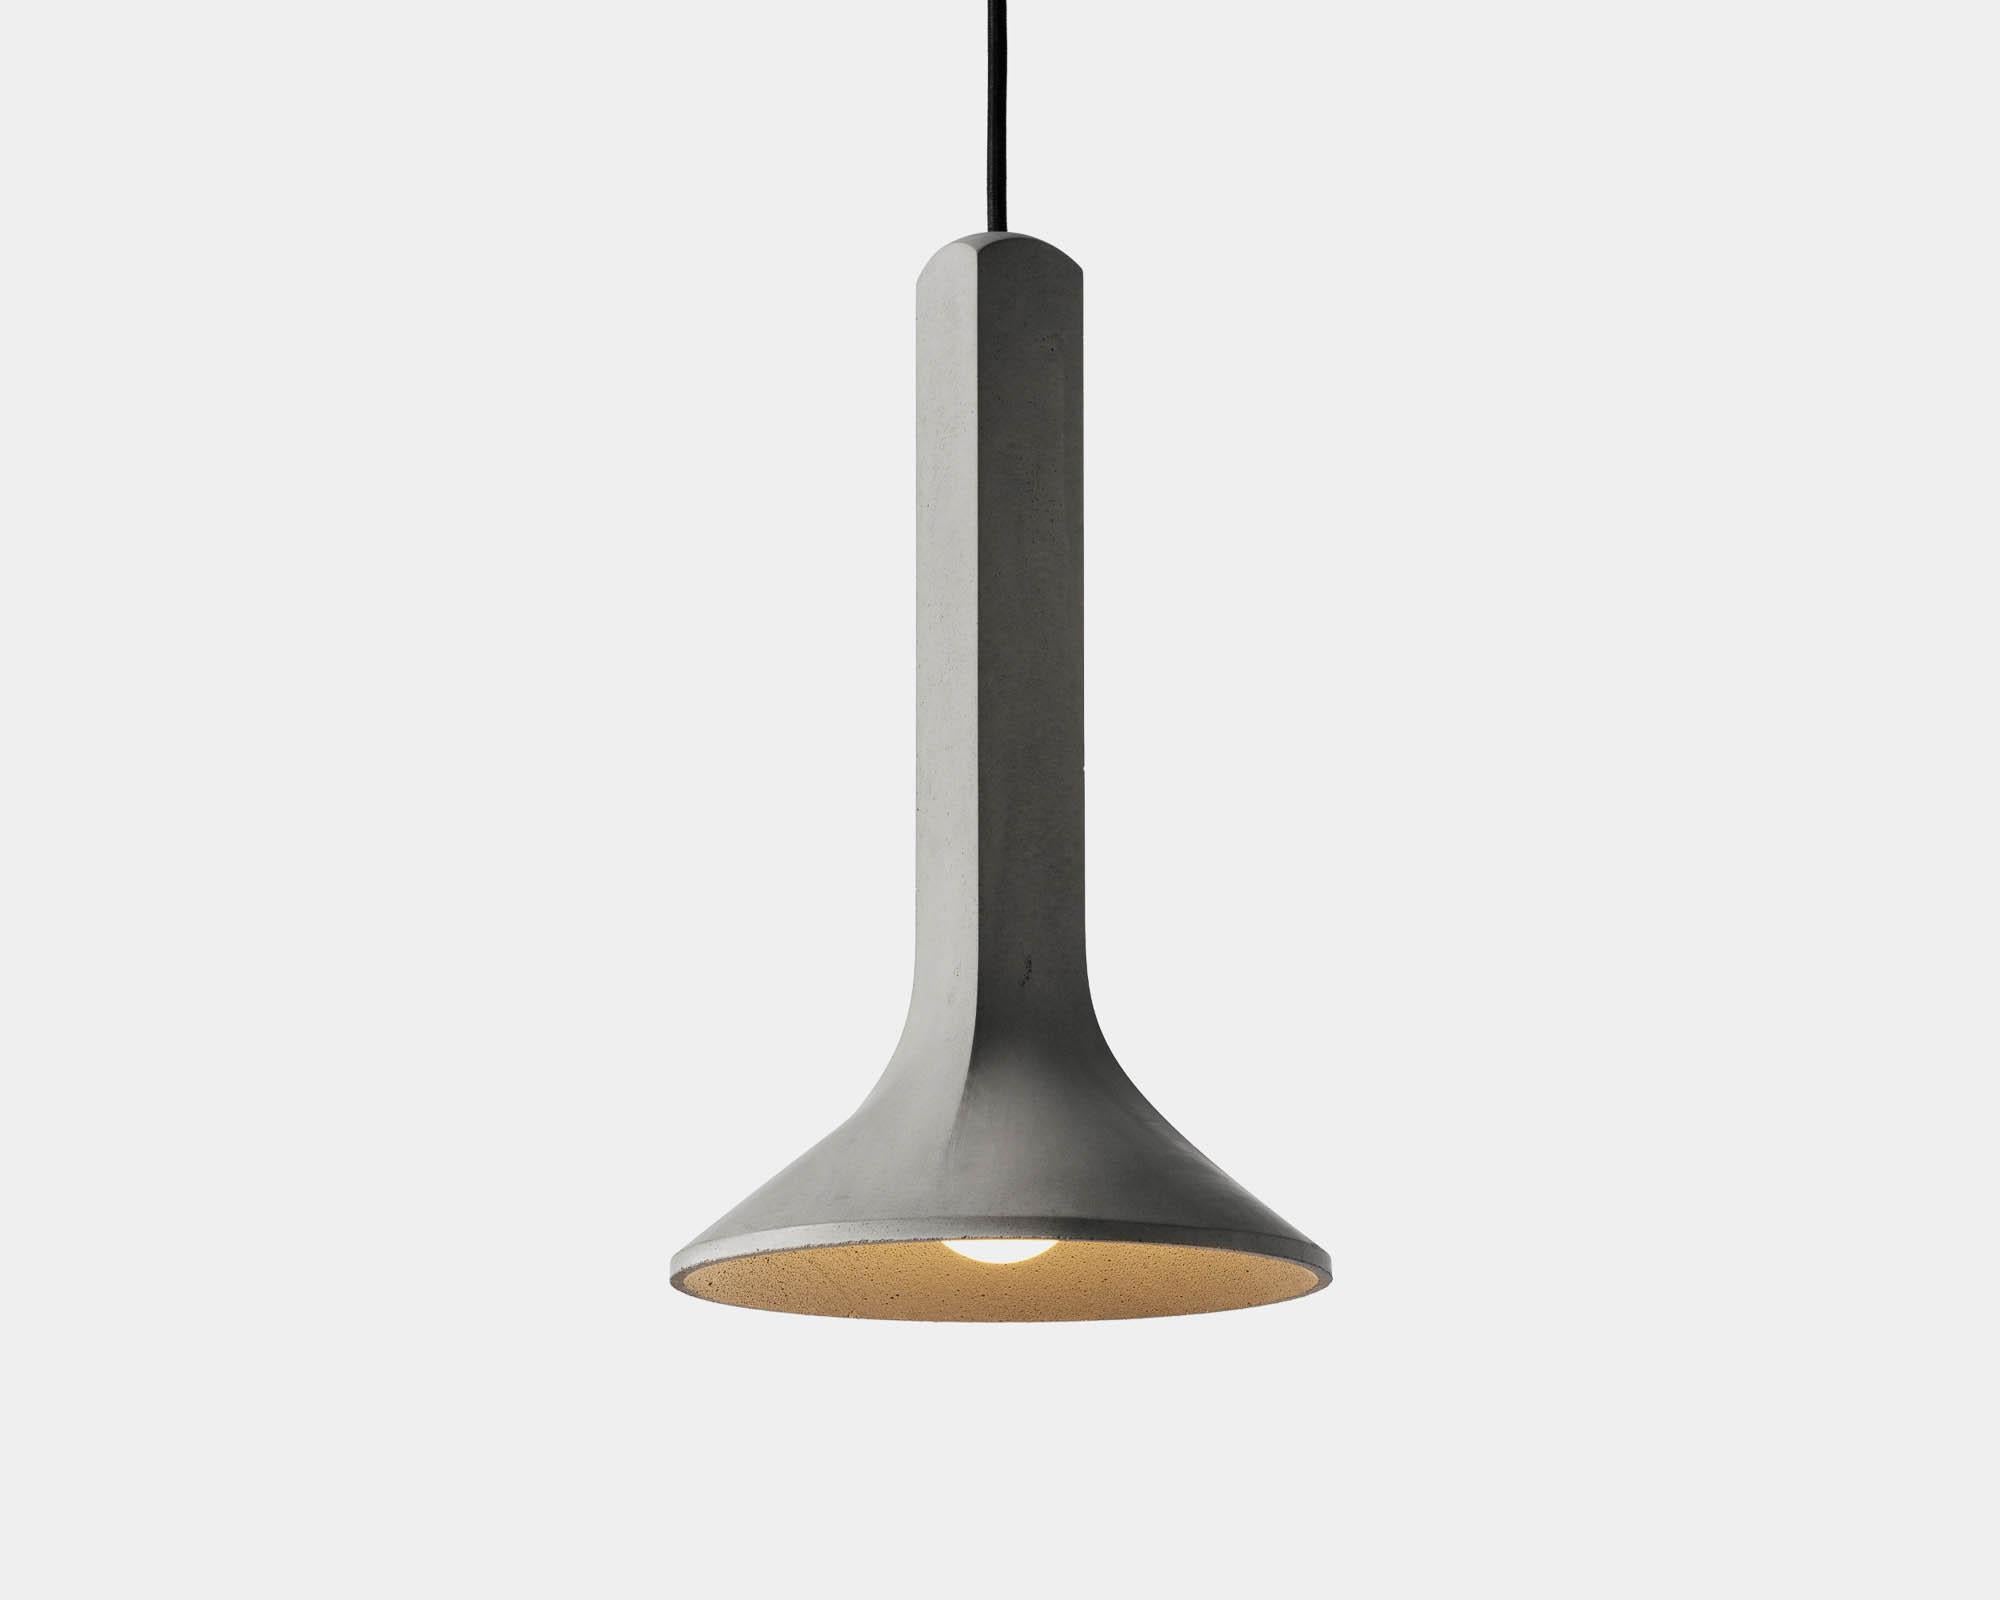 Chuan - Pendant lamp by Bentu Design

Concrete
220 × H 358mm
1.4kg
Light source: E27 250lm 2700K AC 100-240V 50-60Hz 9W IP20 
Cord: 3m black
Ceiling rose: 110mm

Bentu Design's furniture and lightings derive its uniqueness from the